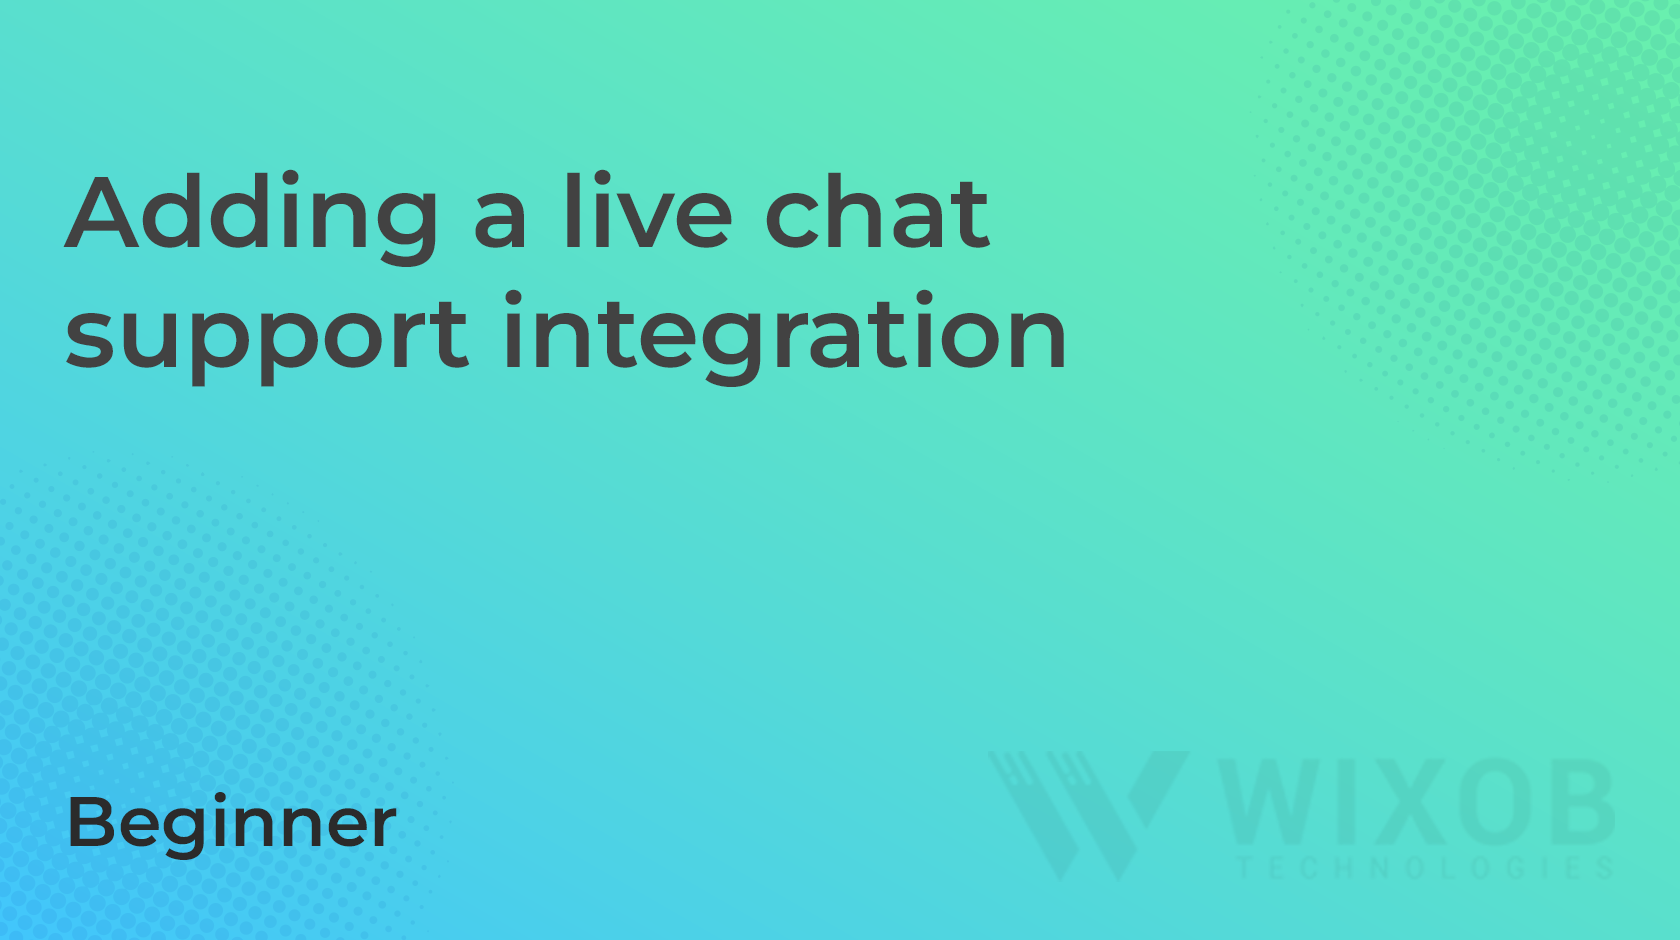 Adding a live chat support integration